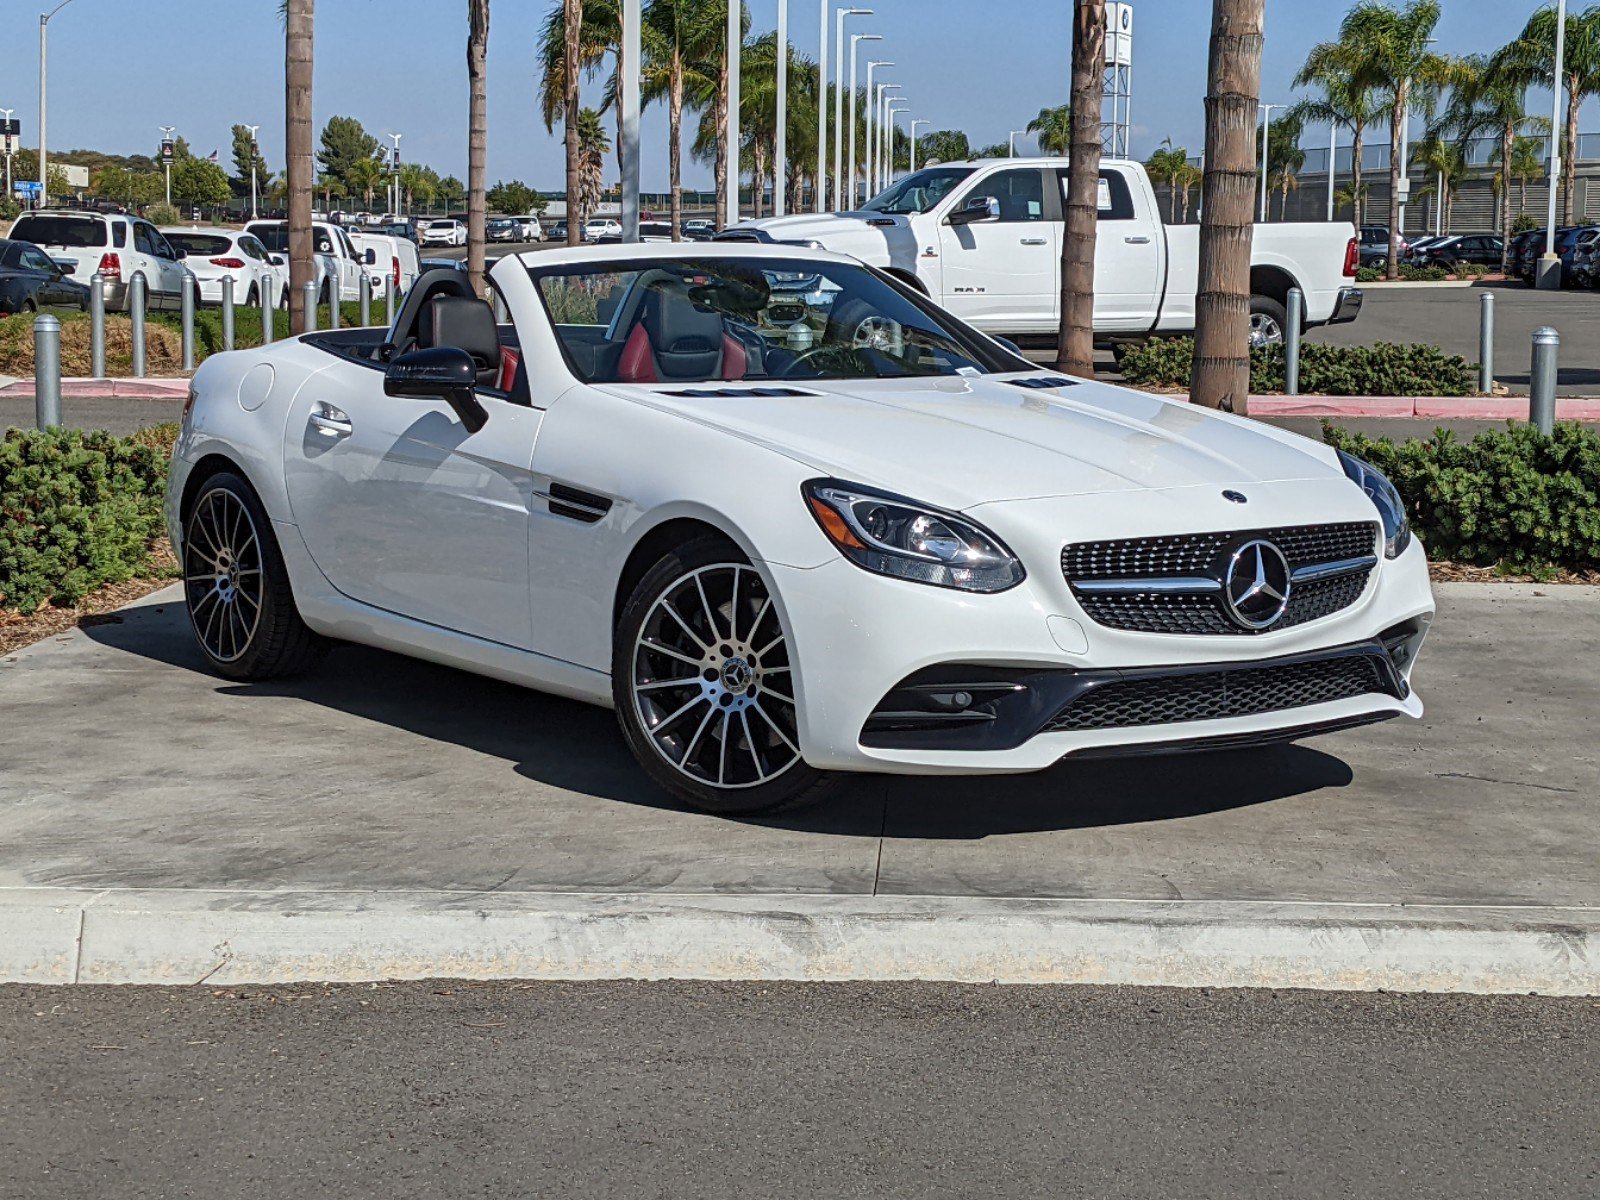 Pre-Owned 2018 Mercedes-Benz SLC 300 RWD Convertible